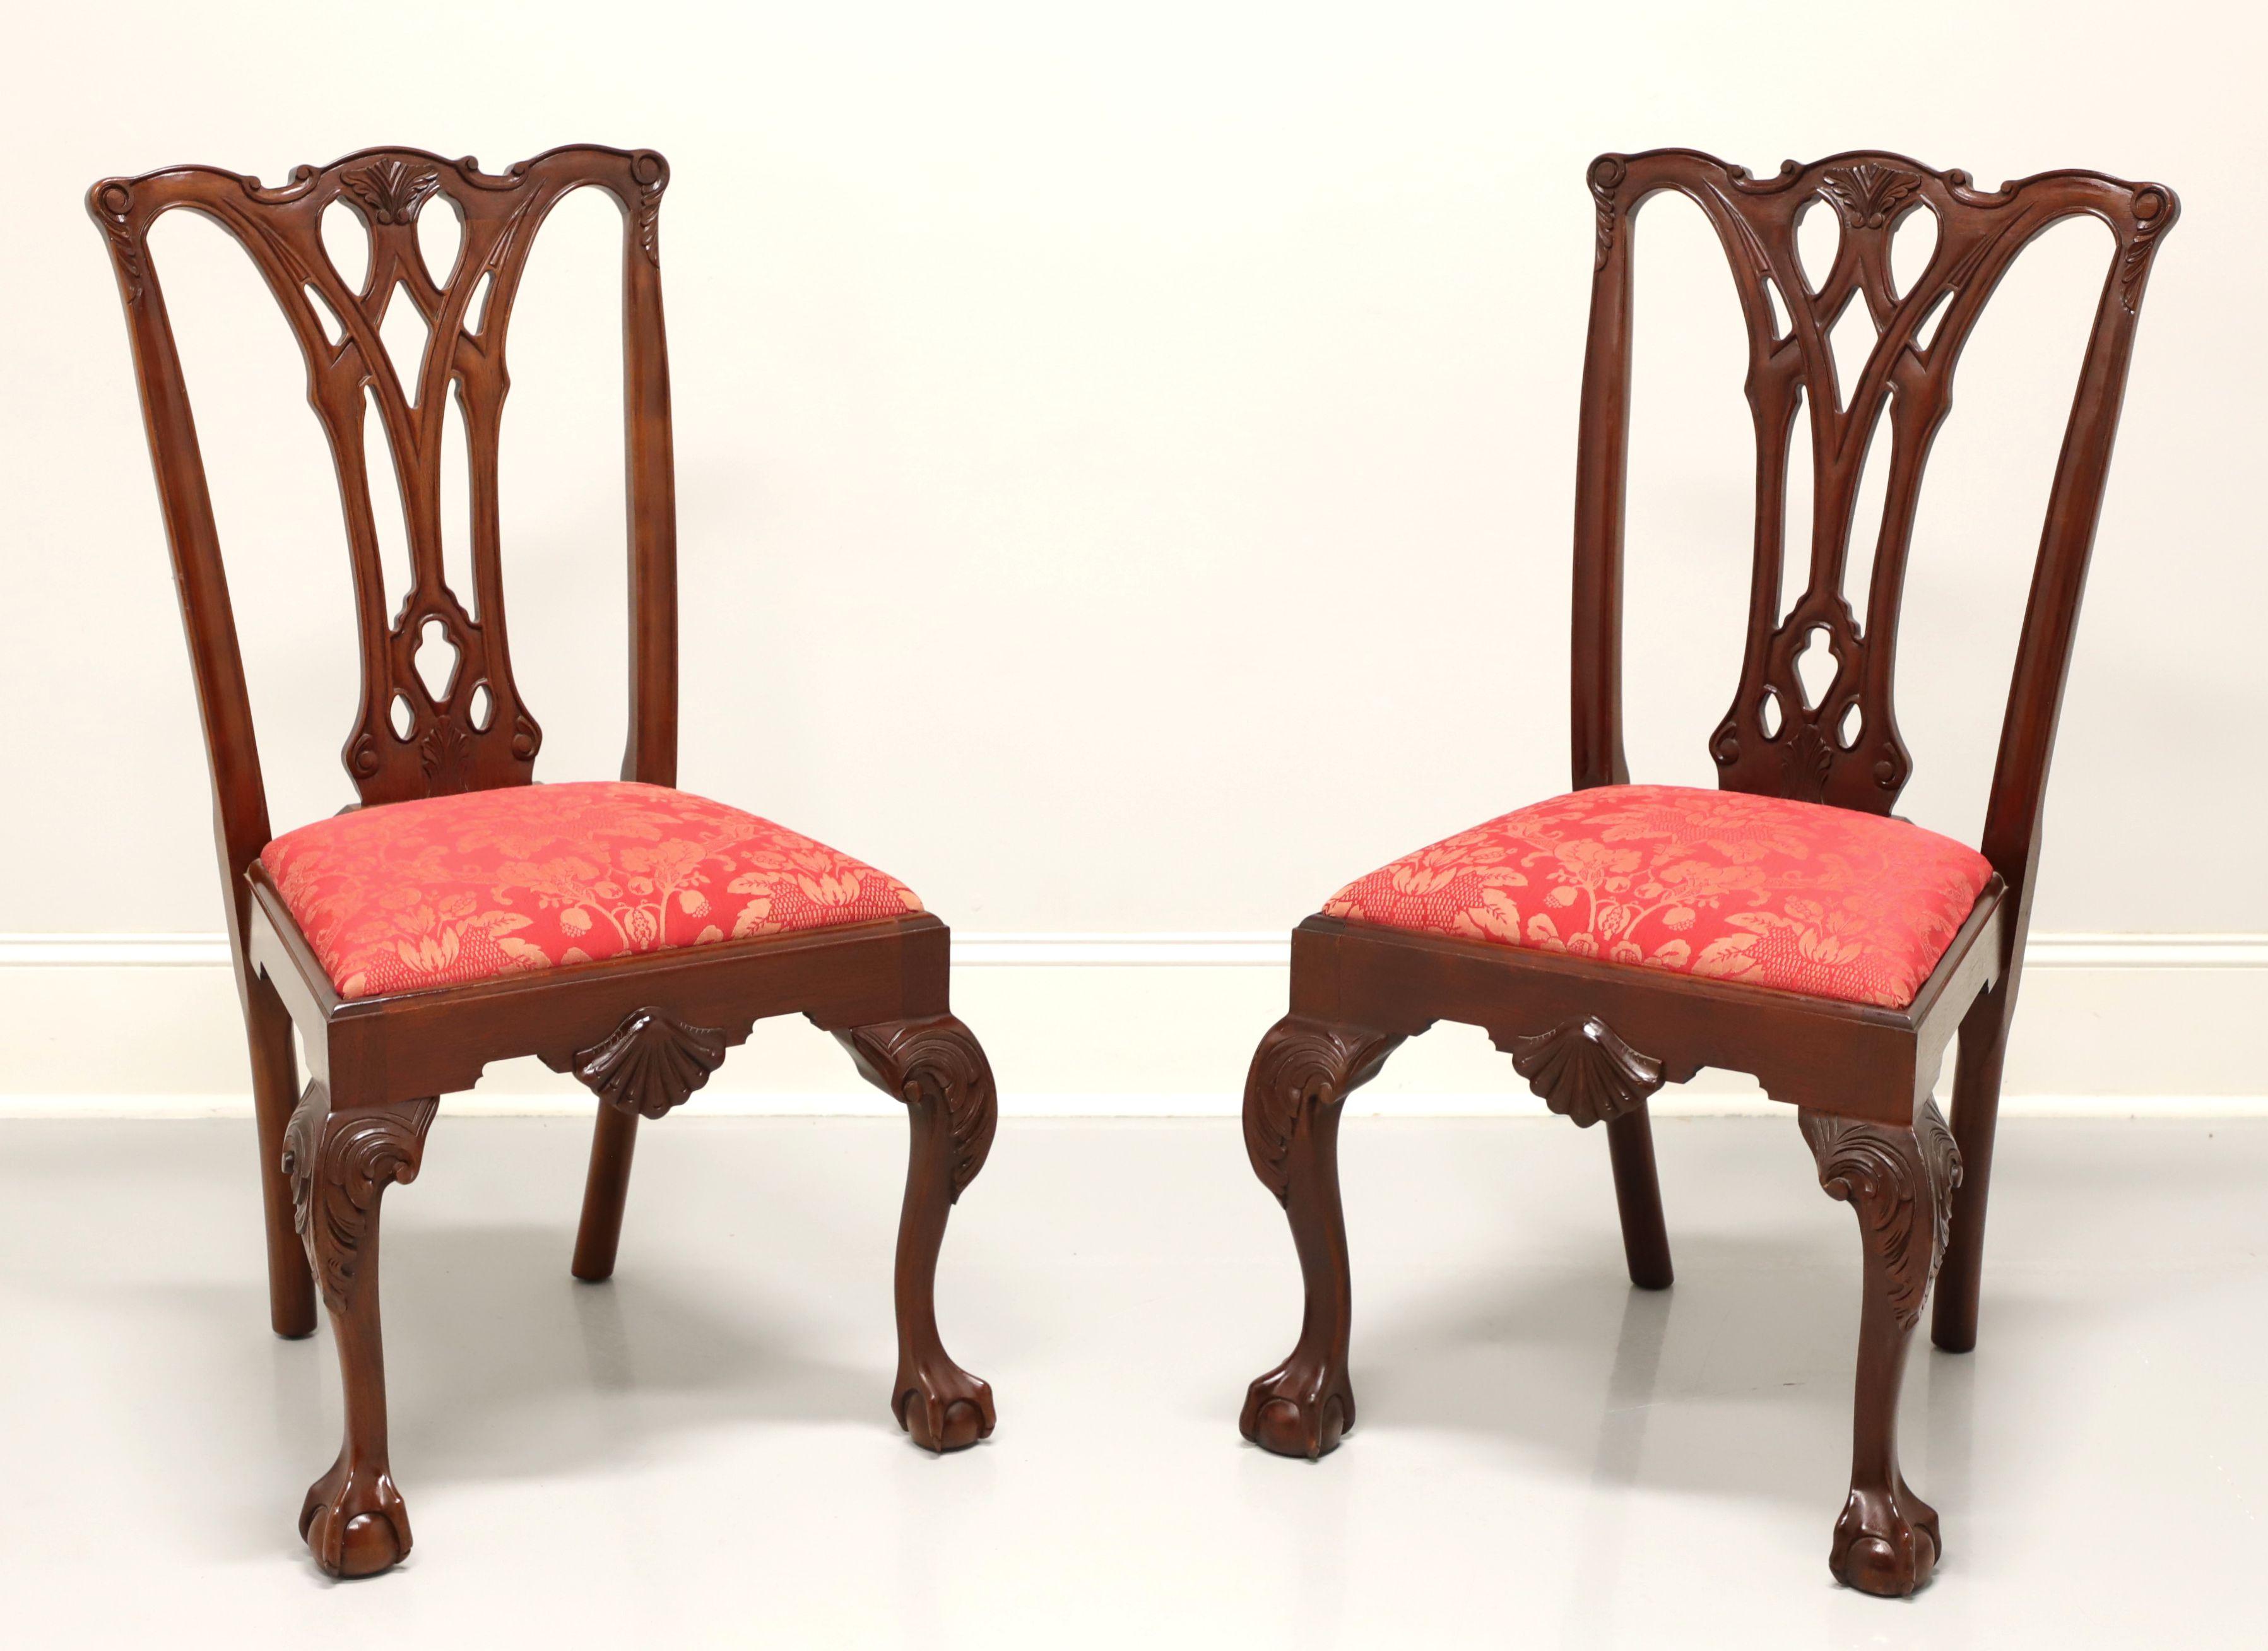 CRAFTIQUE Mahogany Chippendale Ball in Claw Dining Side Chairs - Pair A 3